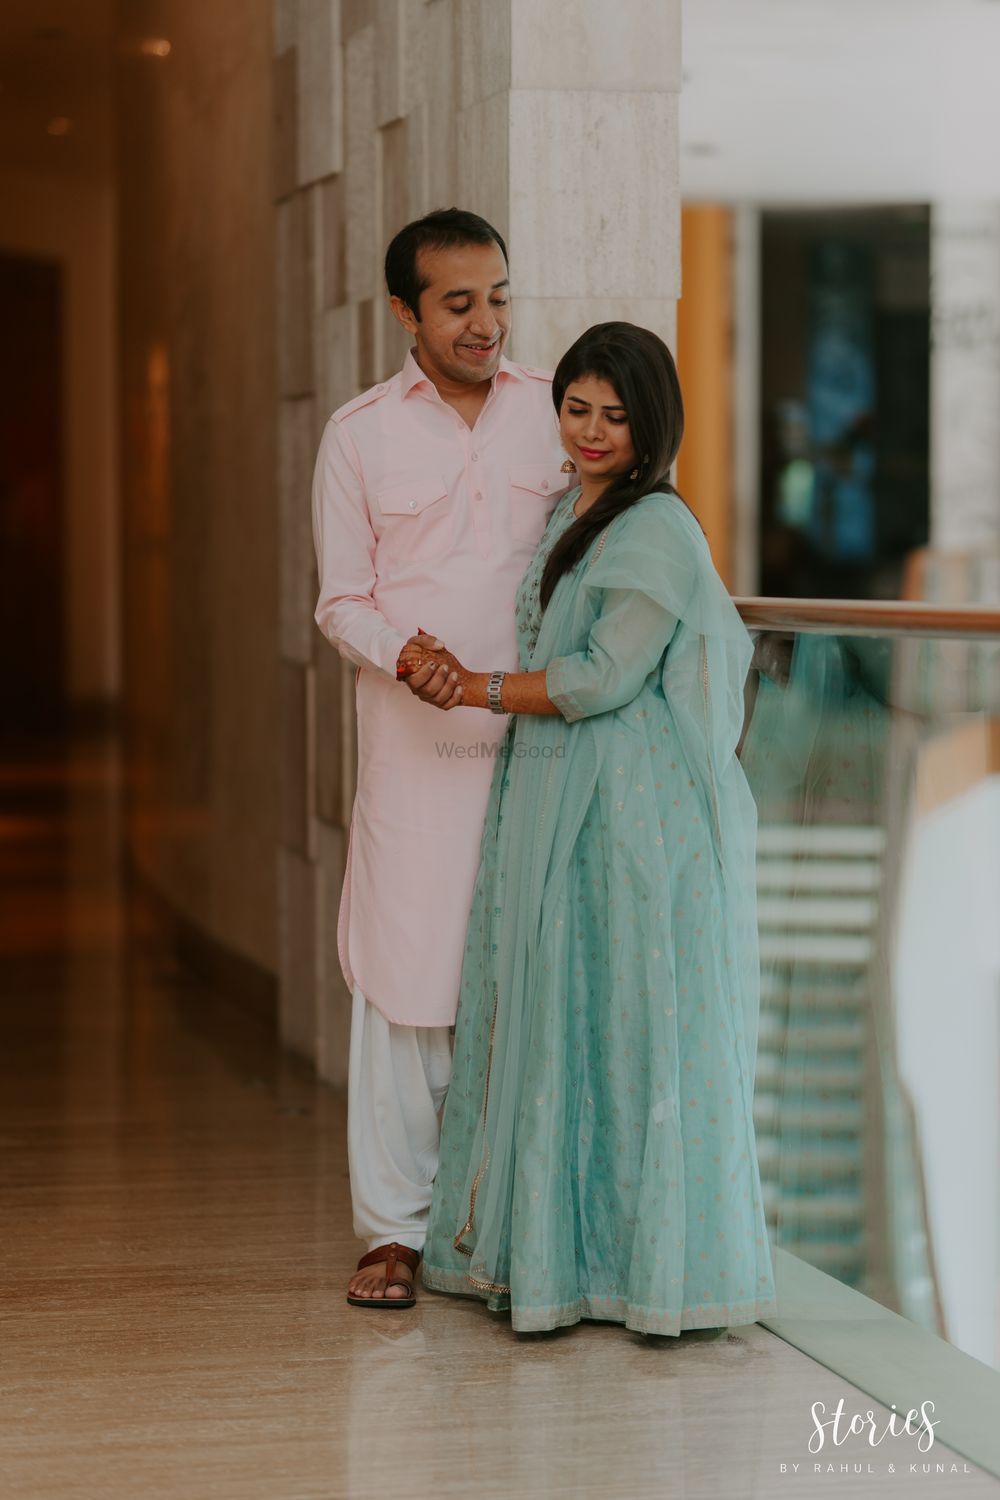 Photo From Naman & Sonal - By Stories by Rahul & Kunal